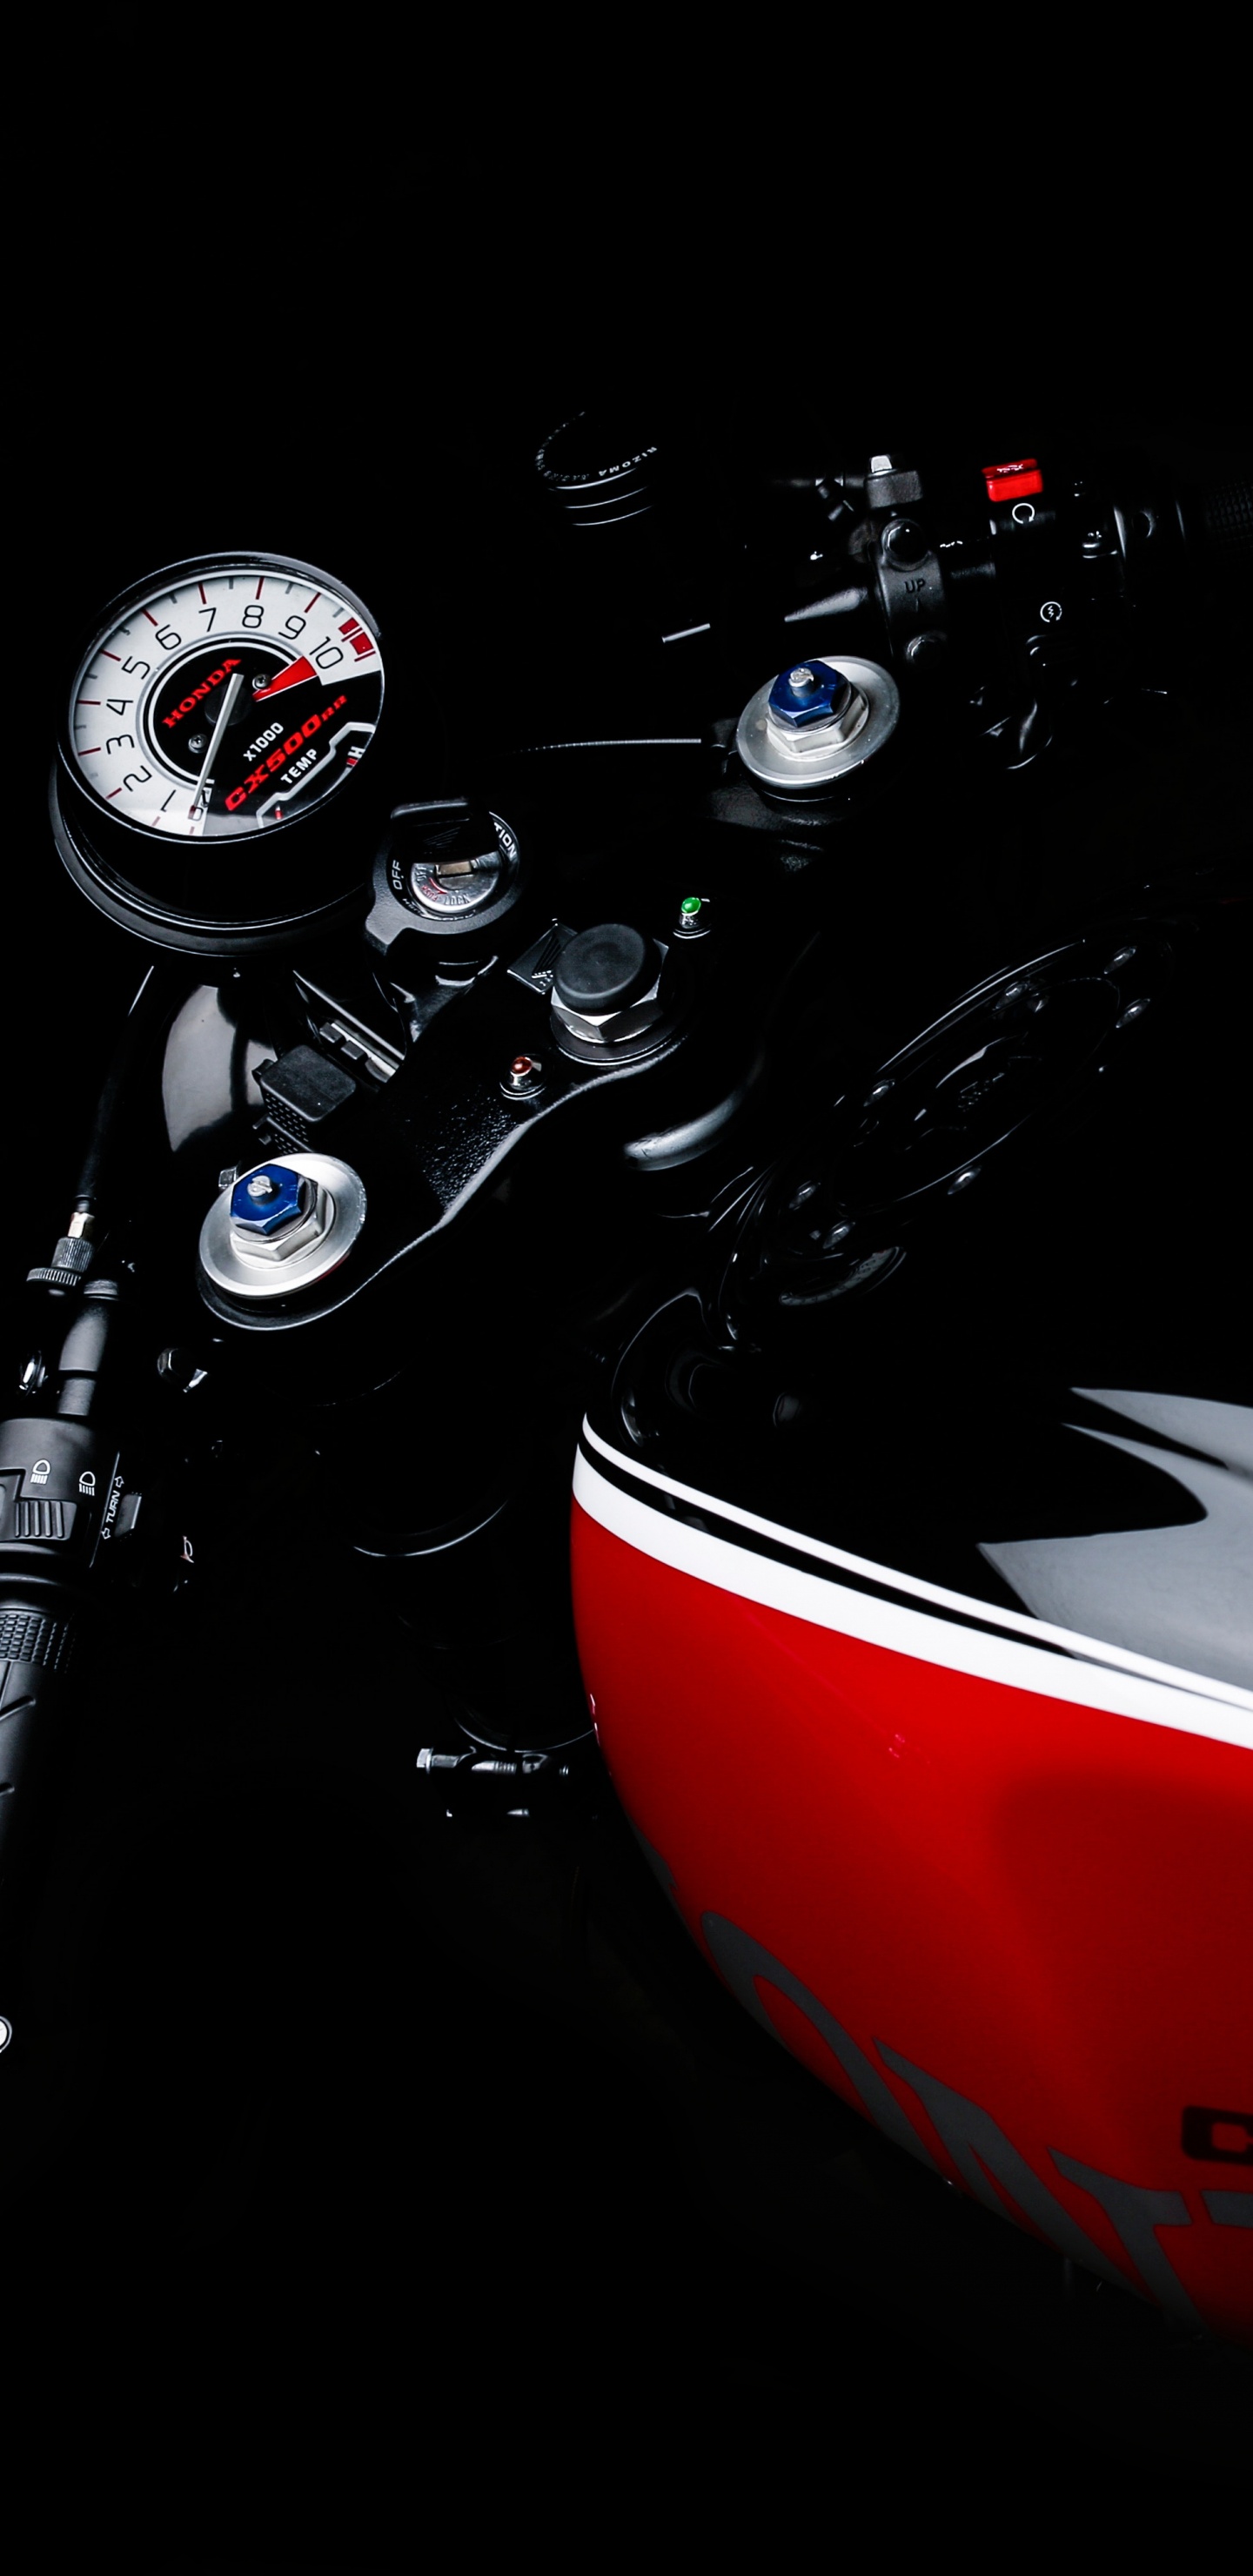 Red and Black Honda Motorcycle. Wallpaper in 1440x2960 Resolution